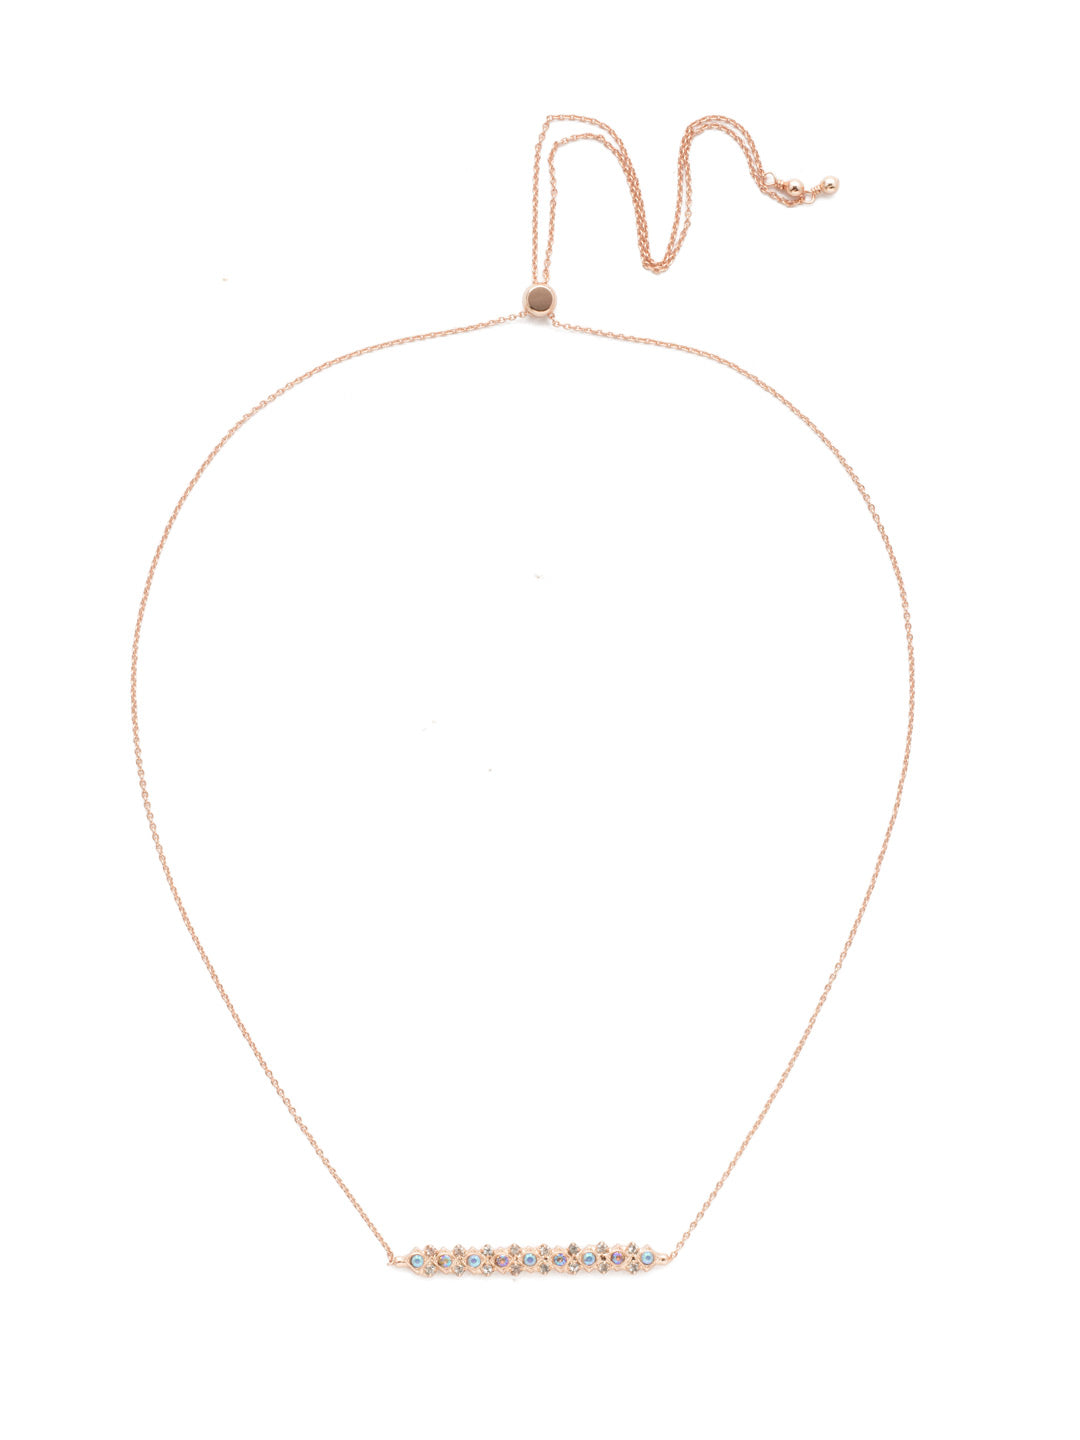 Gia Pendant Necklace - NEN4RGROG - <p>The Gia Pendant Necklace might just be your new favorite. Slide it on and adjust to size. It pairs perfectly with any outfit. Who doesn't love a simply stylish row of sparkling crystals? From Sorrelli's Rose Garden  collection in our Rose Gold-tone finish.</p>